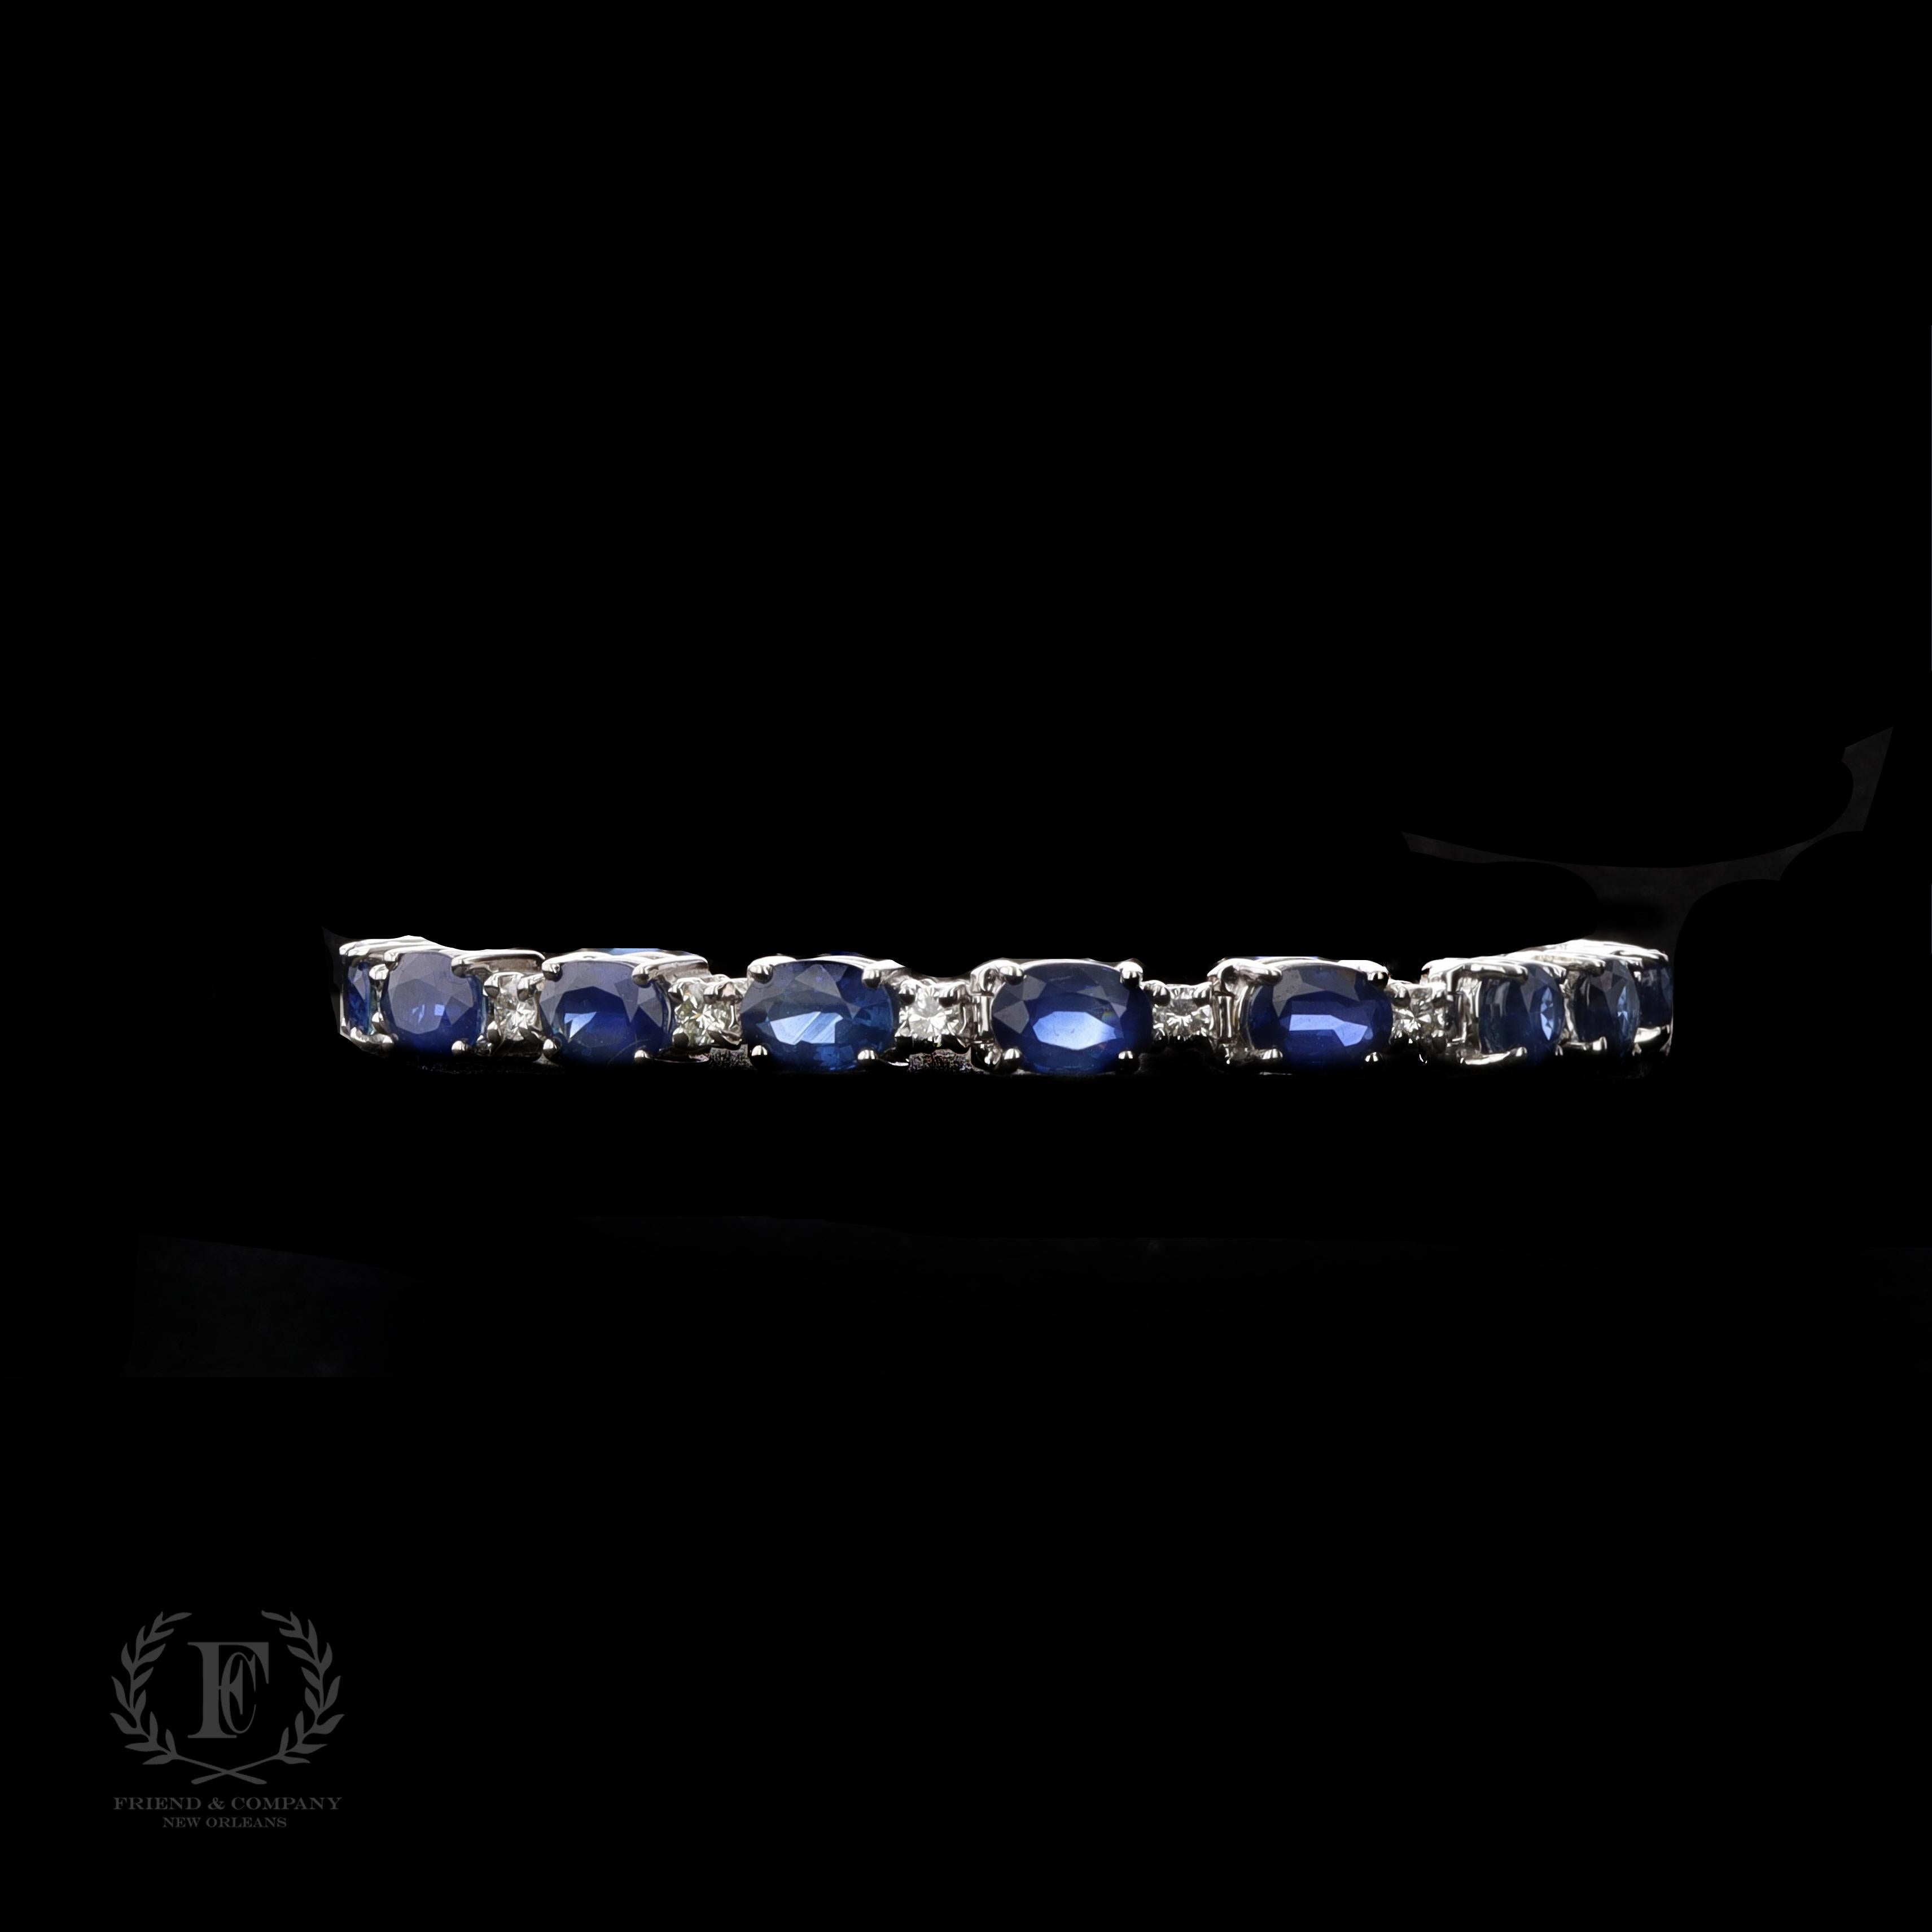 This stunning sapphire and diamond bracelet is a piece to cherish for a lifetime. It is crafted in 14 karat white gold and features 17 oval cut blue sapphires with a total weight of 14.28 carats. The bracelet also contains 18 round cut diamonds with